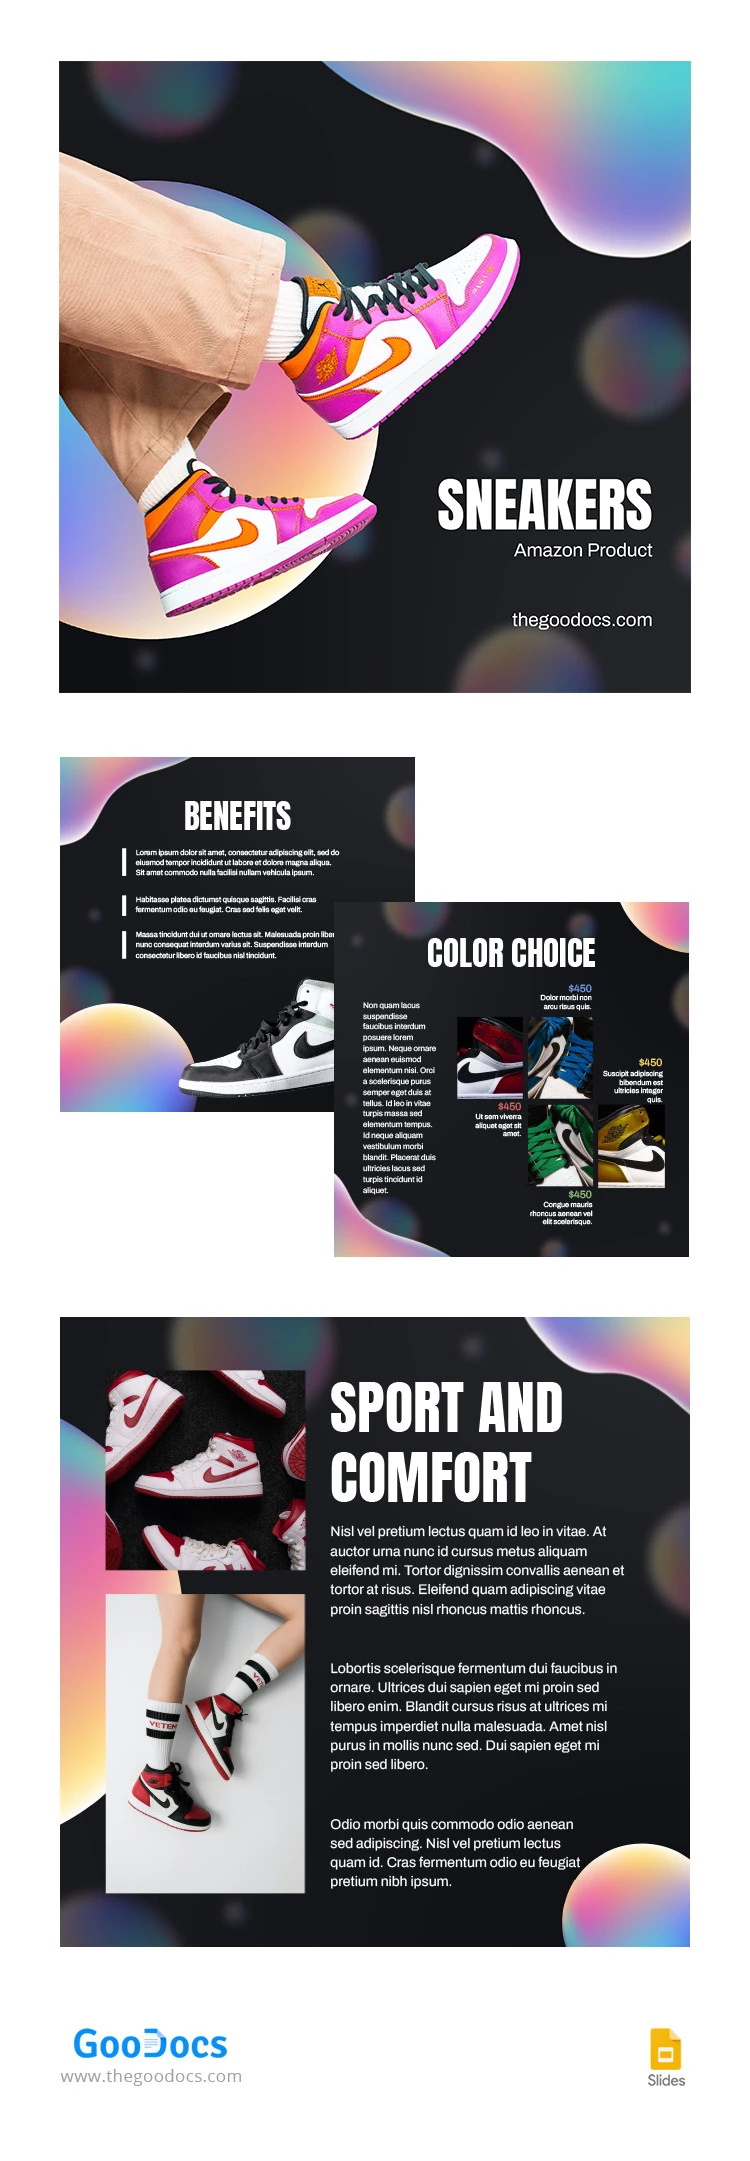 Sneakers Amazon Product - free Google Docs Template - 10065296